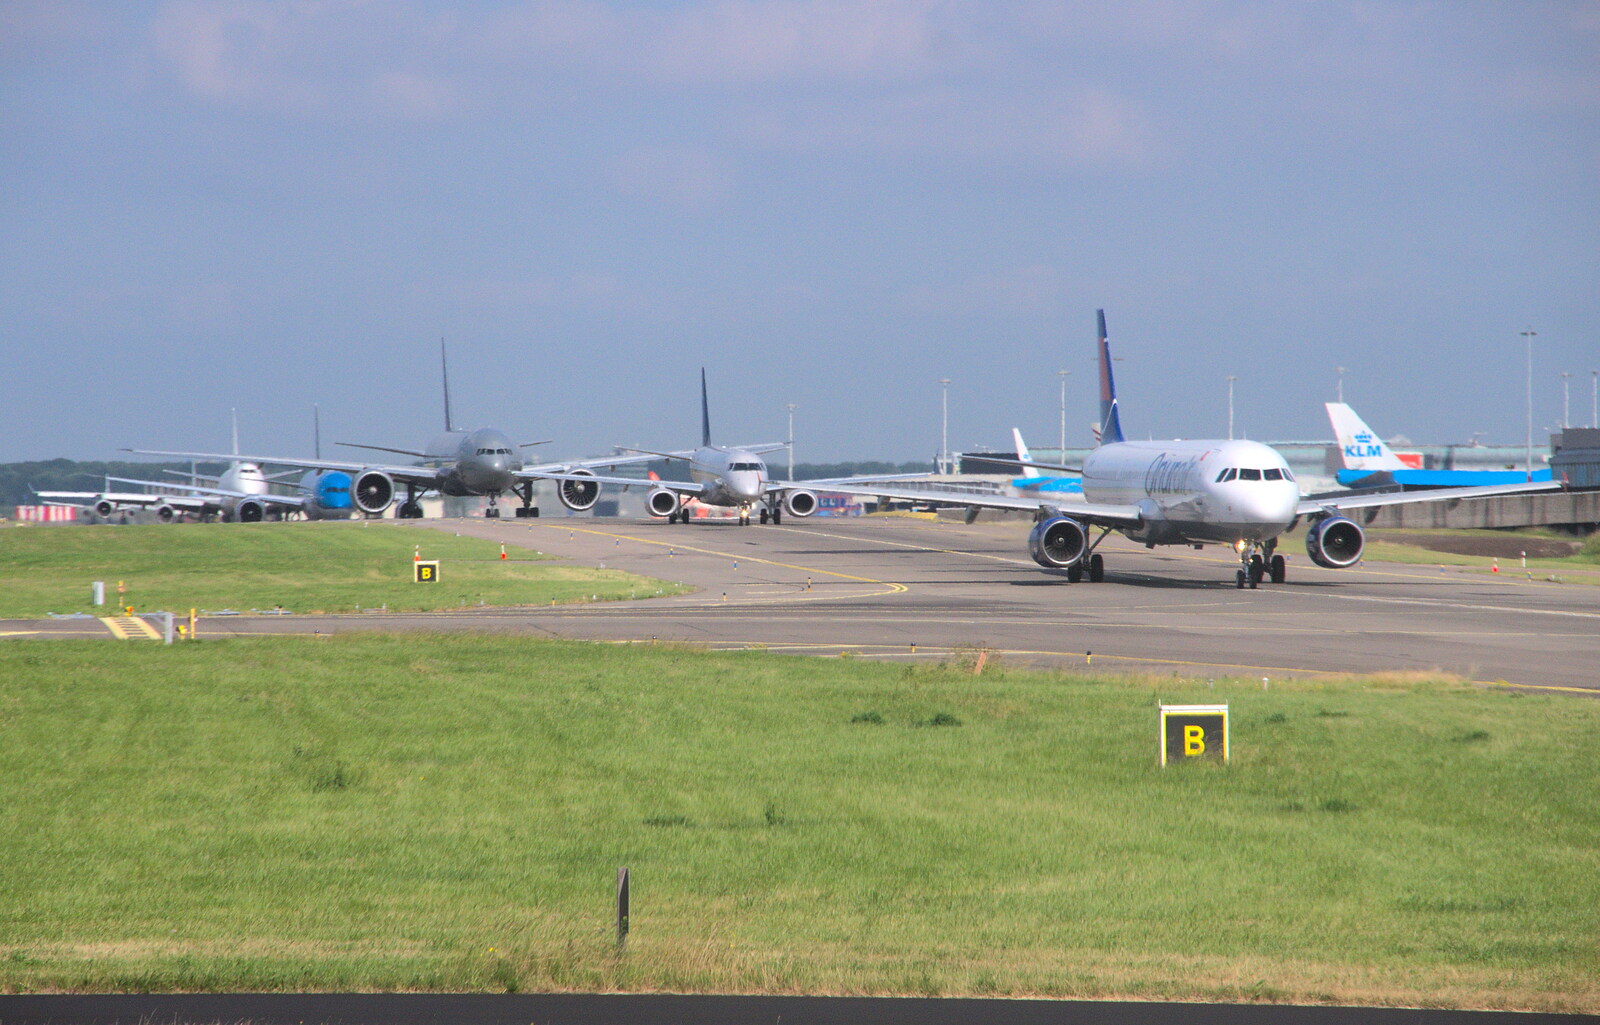 There's a queue of at least seven aircraft behind us from A Postcard from Utrecht, Nederlands - 10th June 2018